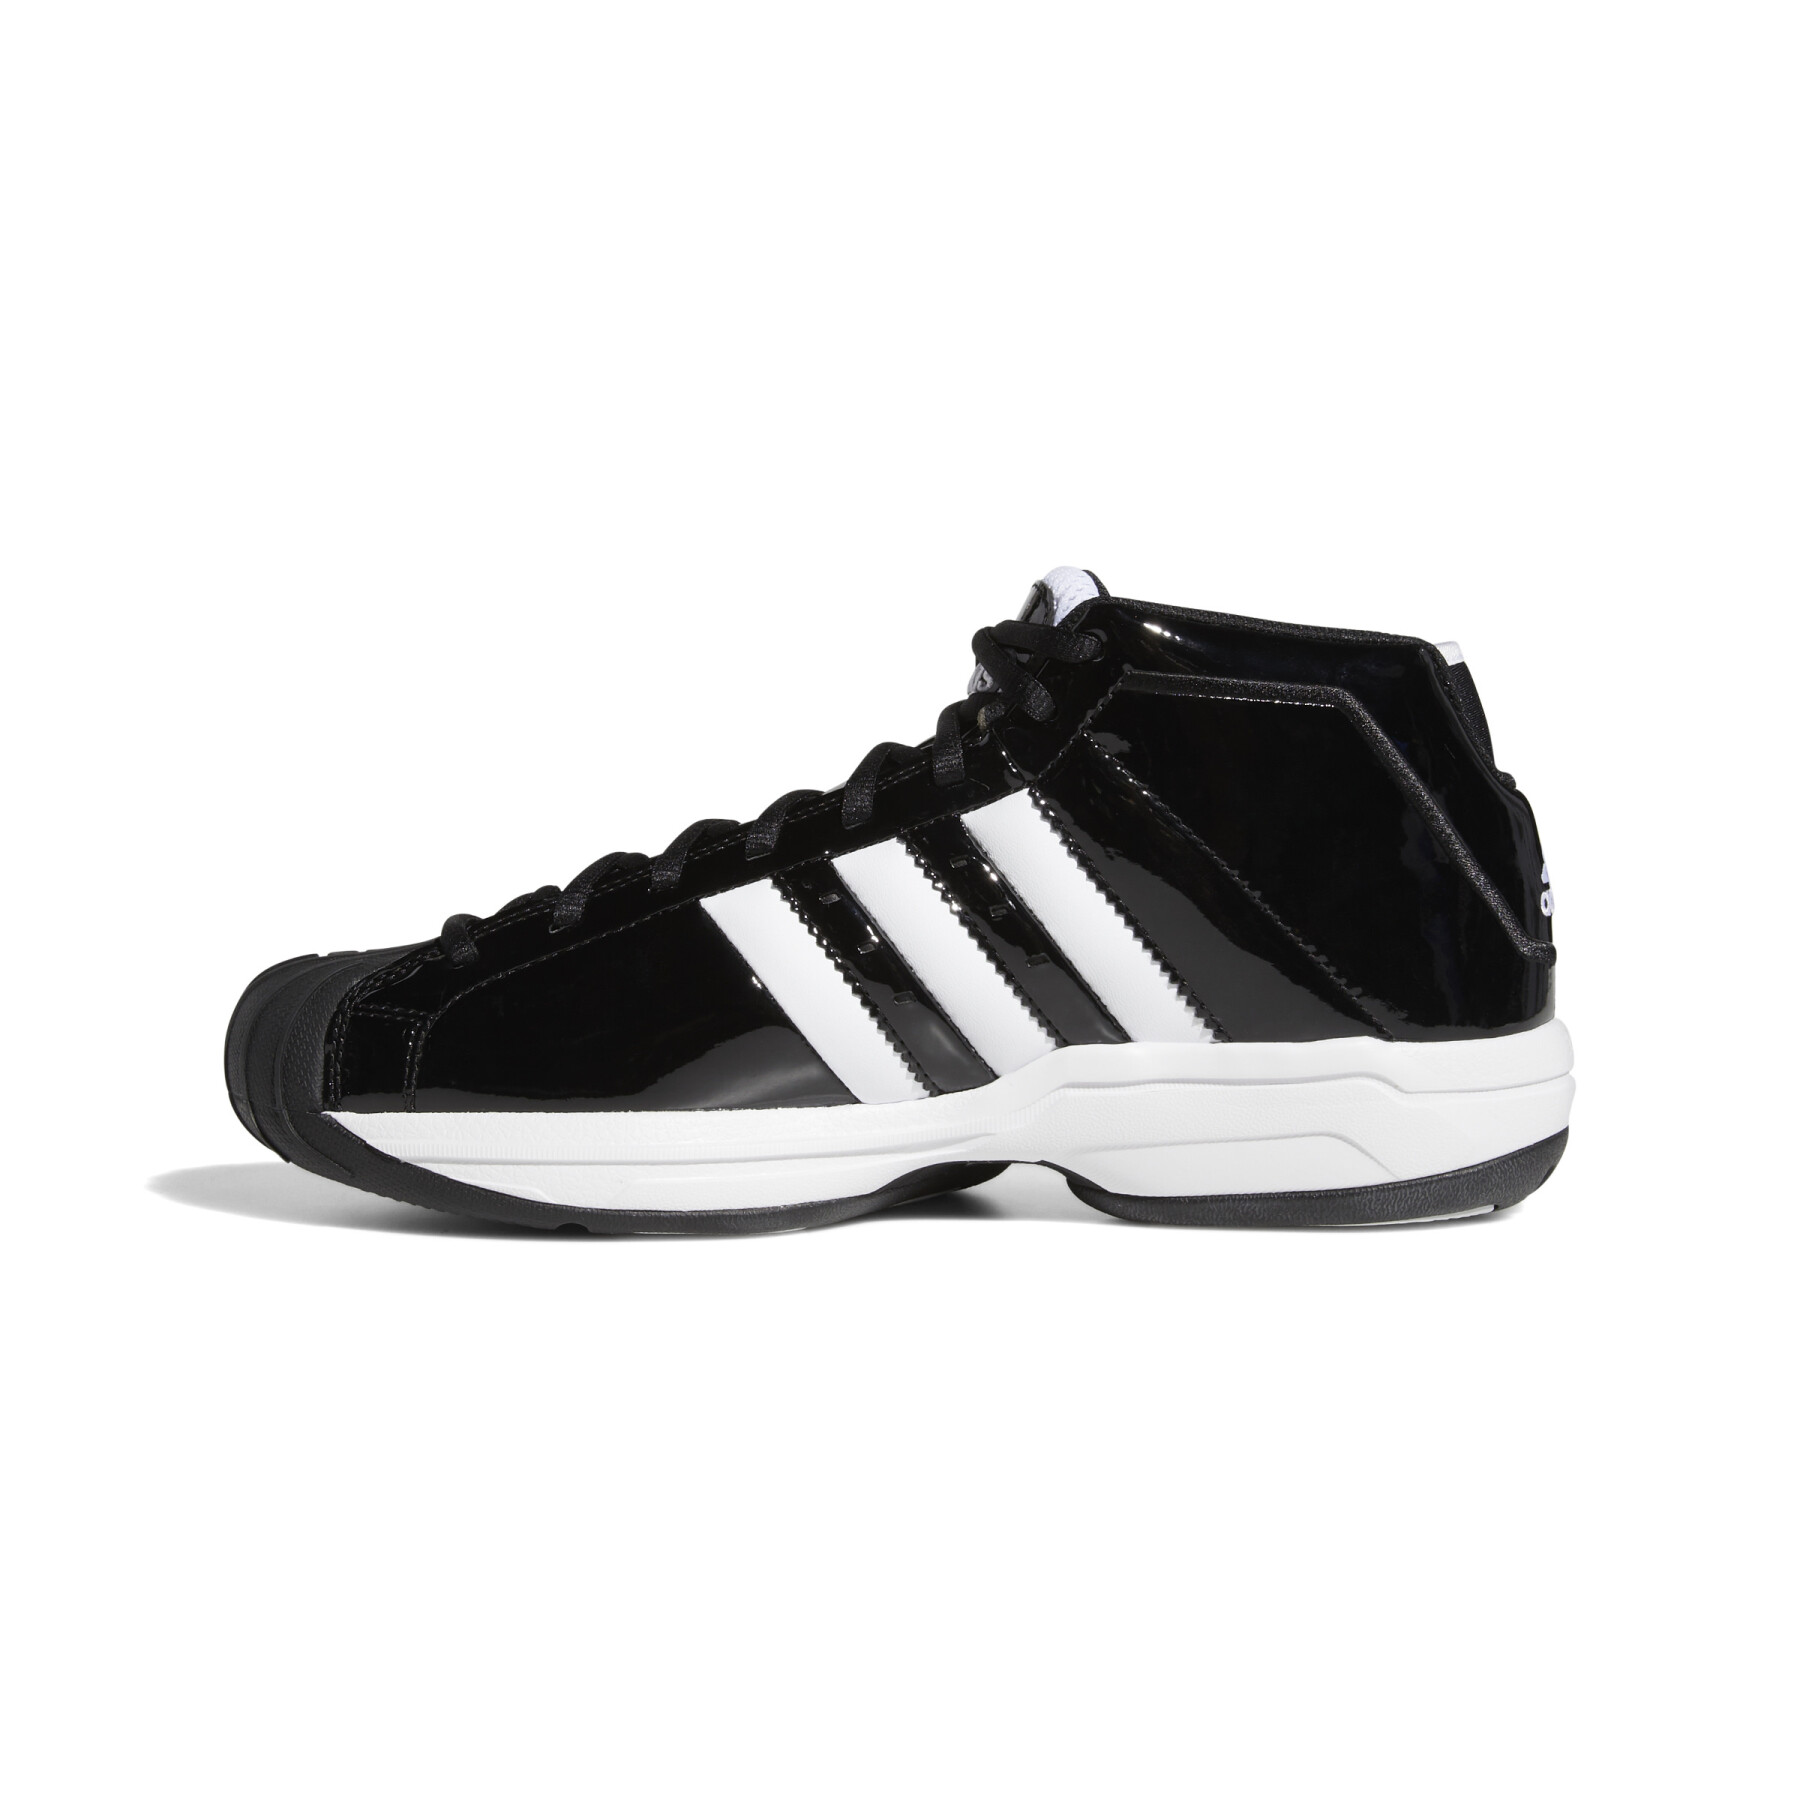 Sneakers adidas Pro Model 2G